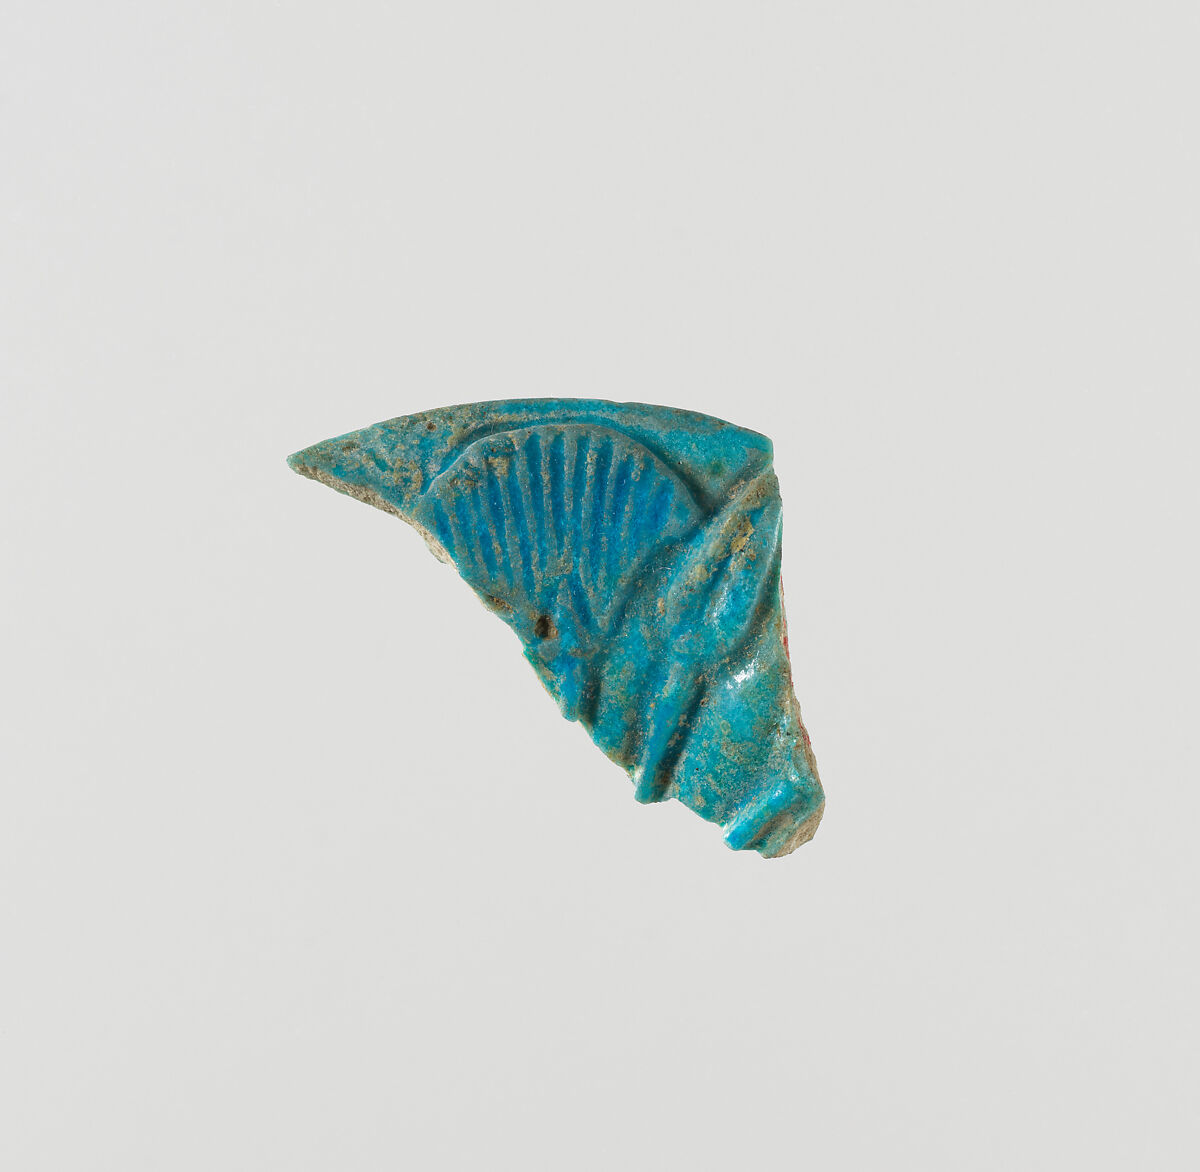 Rim of chalice foot decorated with papyrus, Faience 